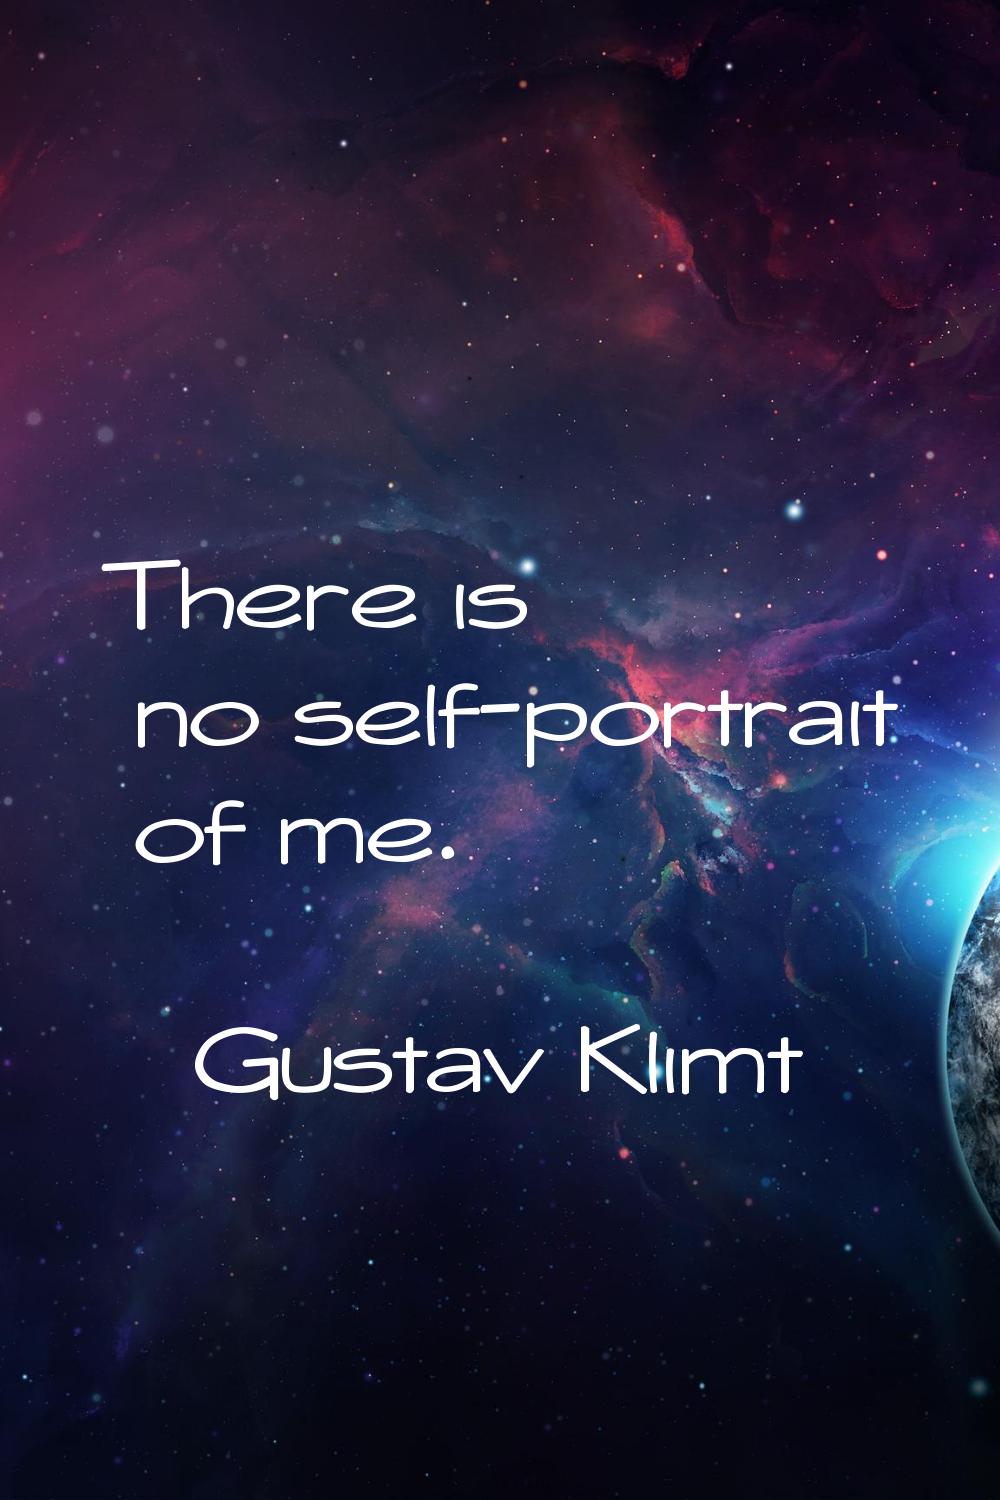 There is no self-portrait of me.